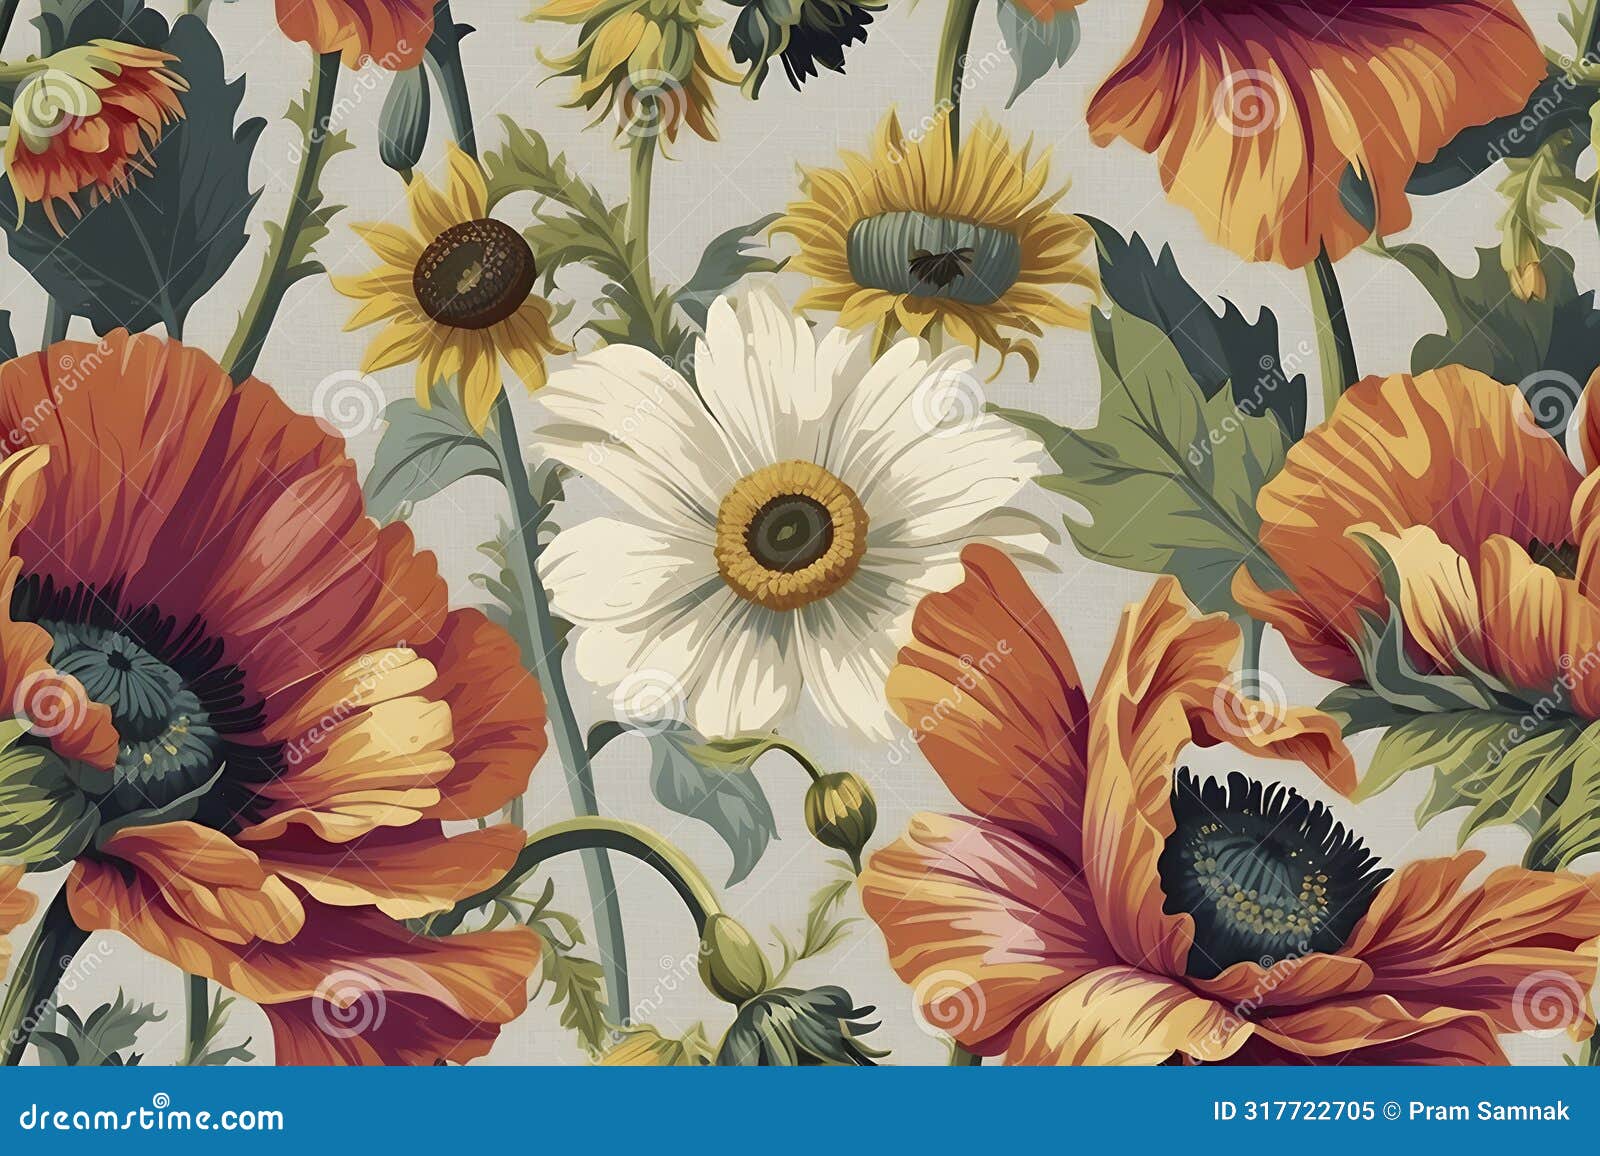 a seamless pattern of floral chintz pattern reminiscent of the 1940s.